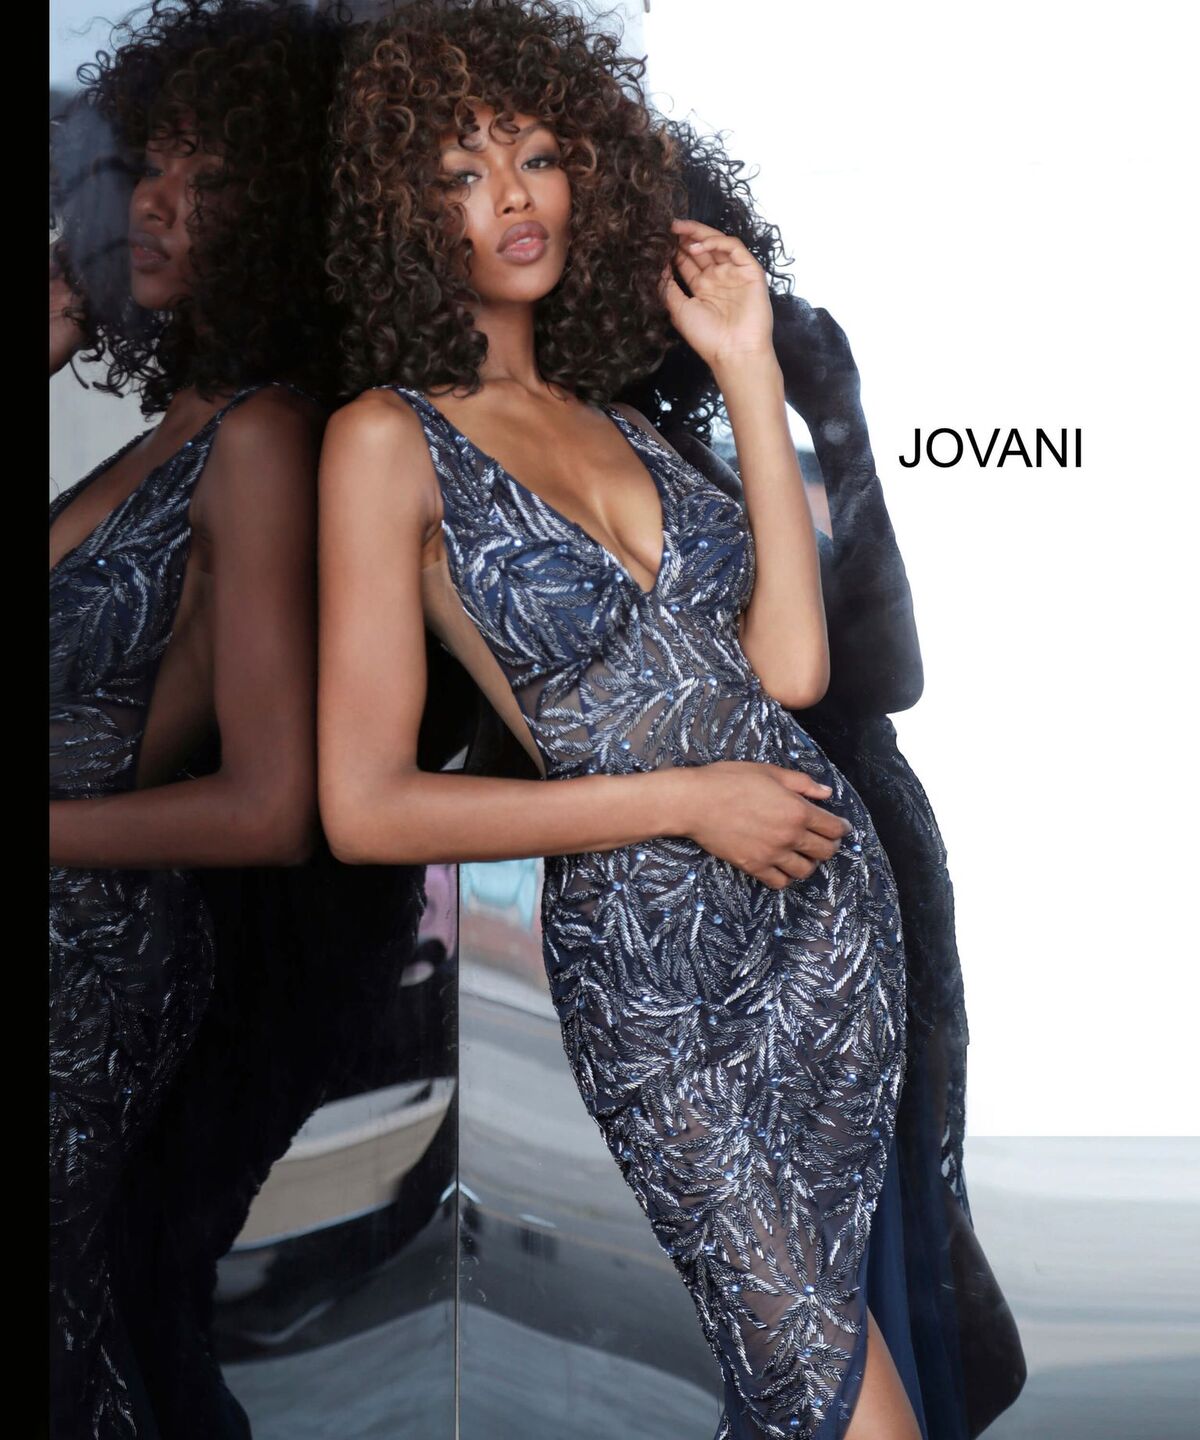 Jovani 1863 is a Gorgeous sheer Fully embellished Plunging Deep v neckline prom dress & Formal evening gown with slit in the sheer column skirt. Fully Embellished Crystal accented beaded sheer fitted bodice. Sheer side panels with mesh inserts.   Available colors:  Navy, Red, Silver/Nude, White  Available sizes:  00-24 